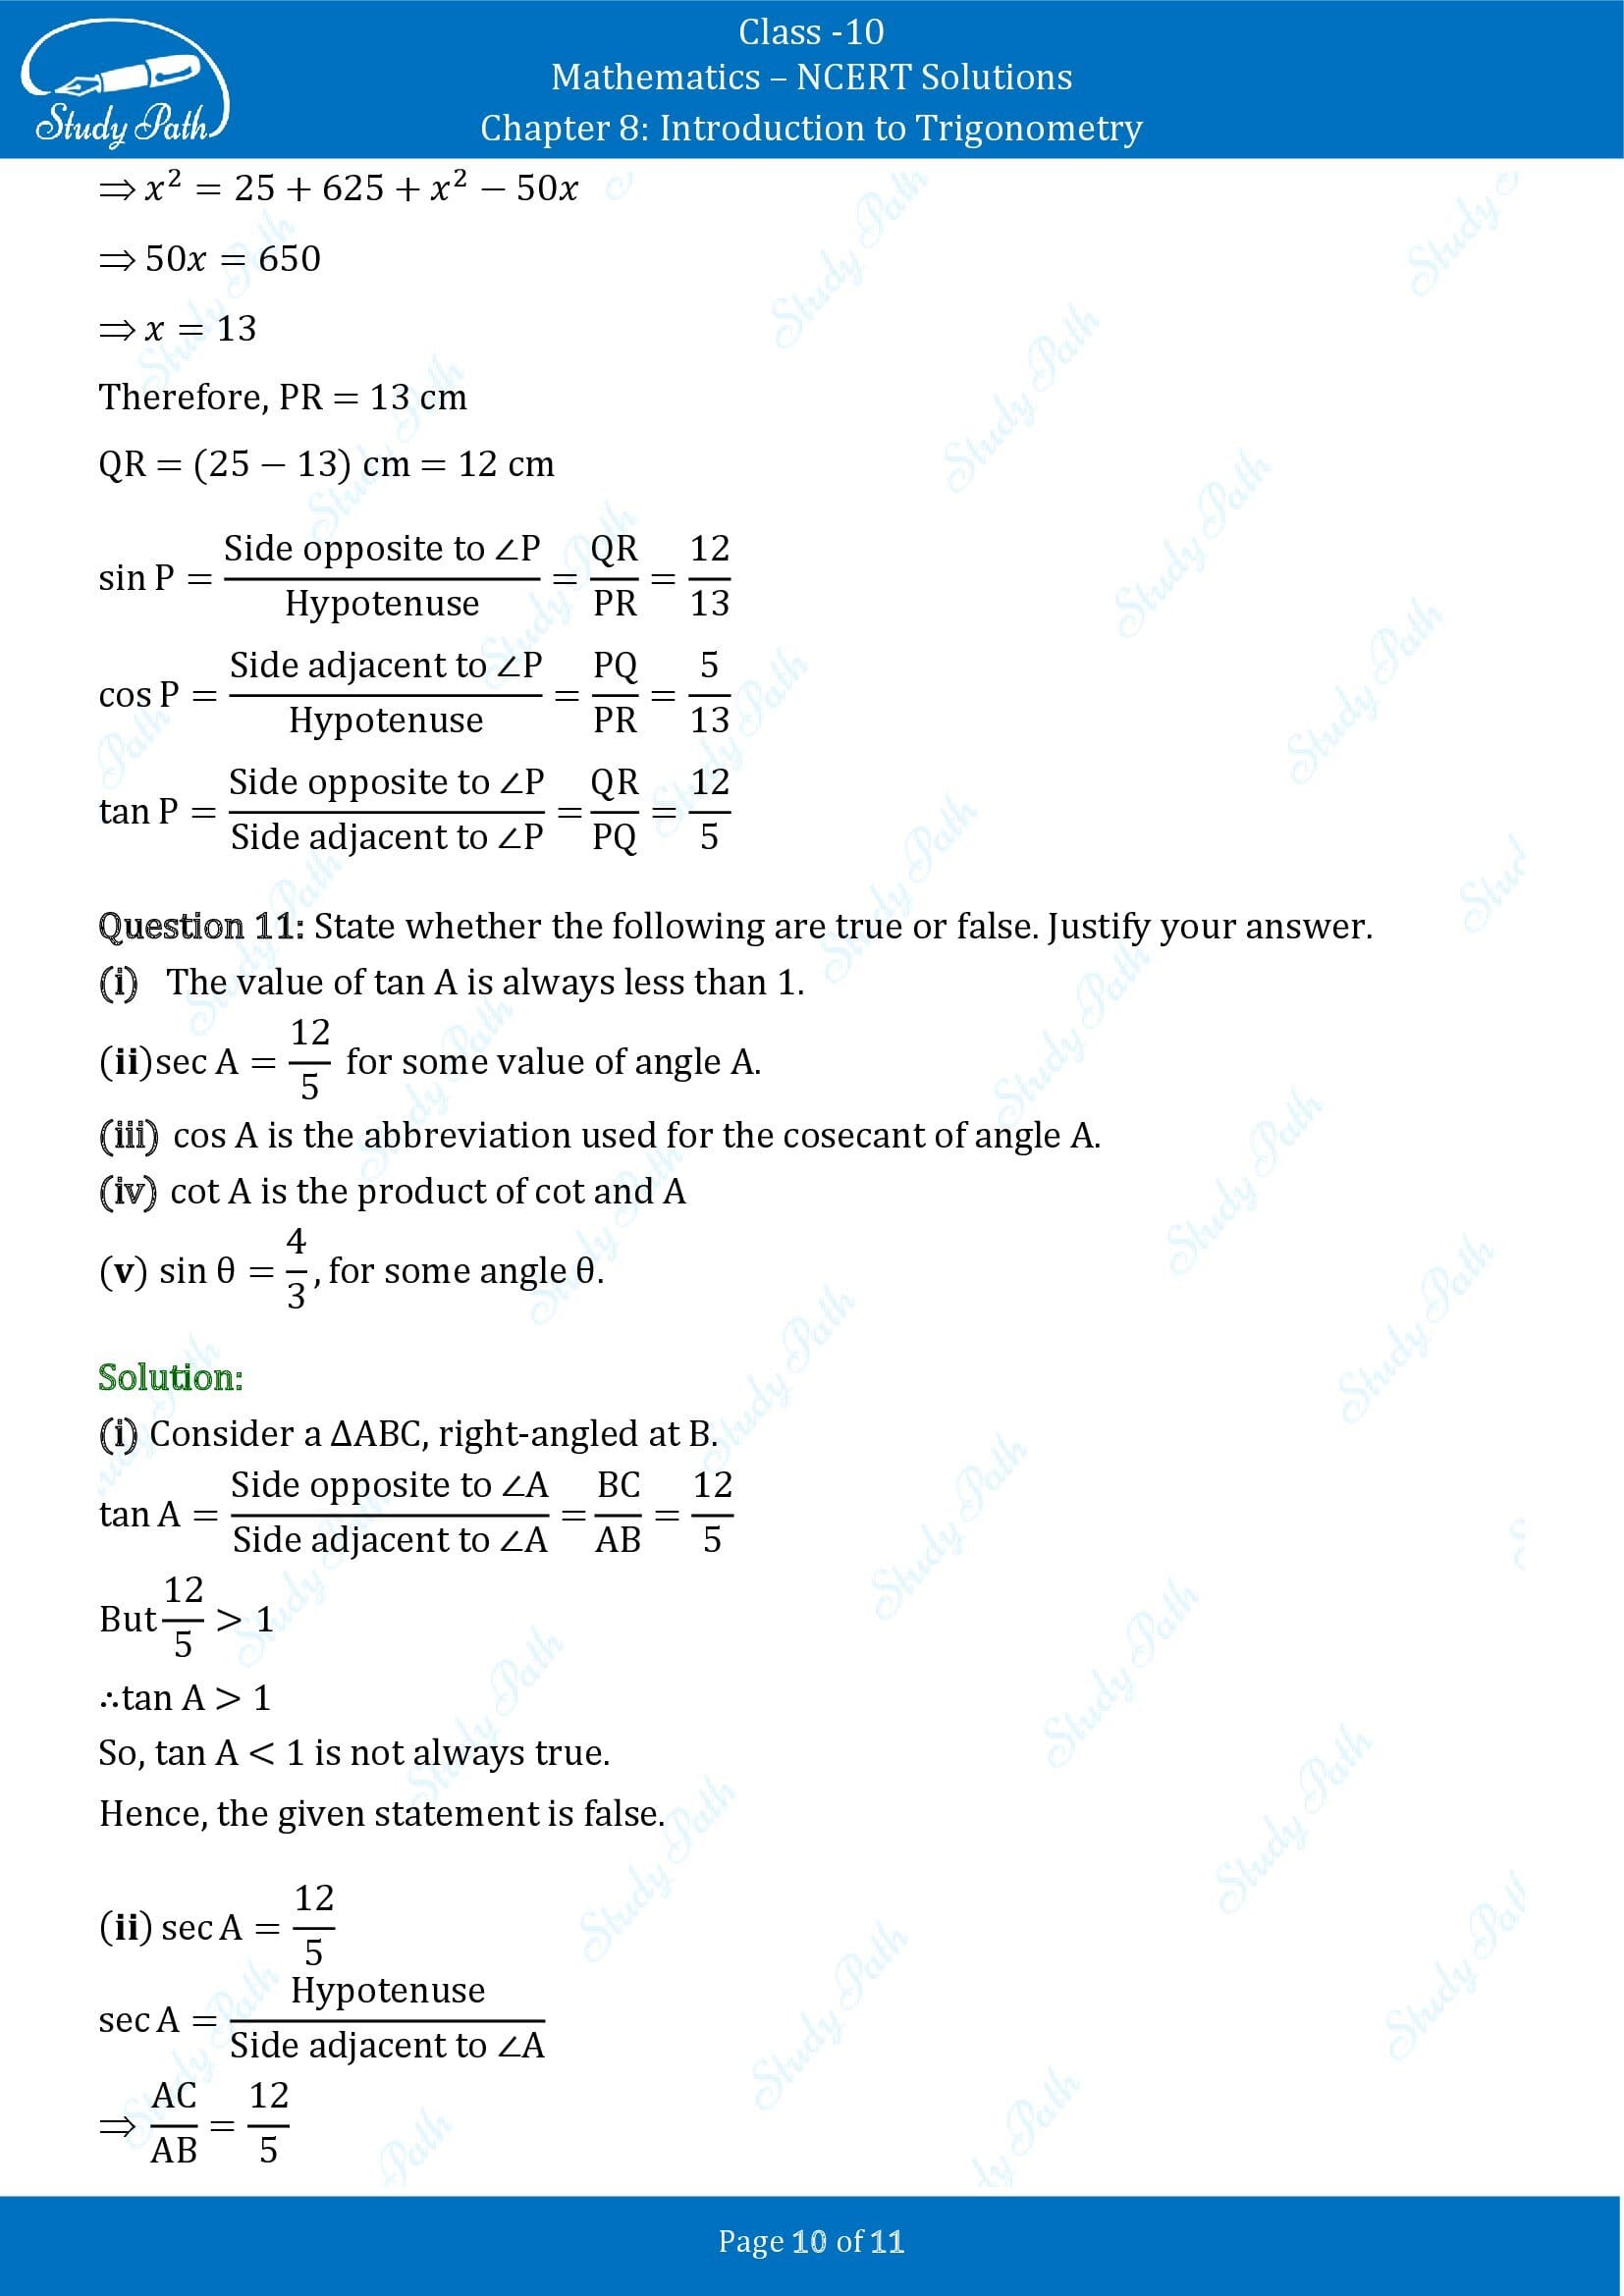 NCERT Solutions for Class 10 Maths Chapter 8 Introduction to Trigonometry Exercise 8.1 00010